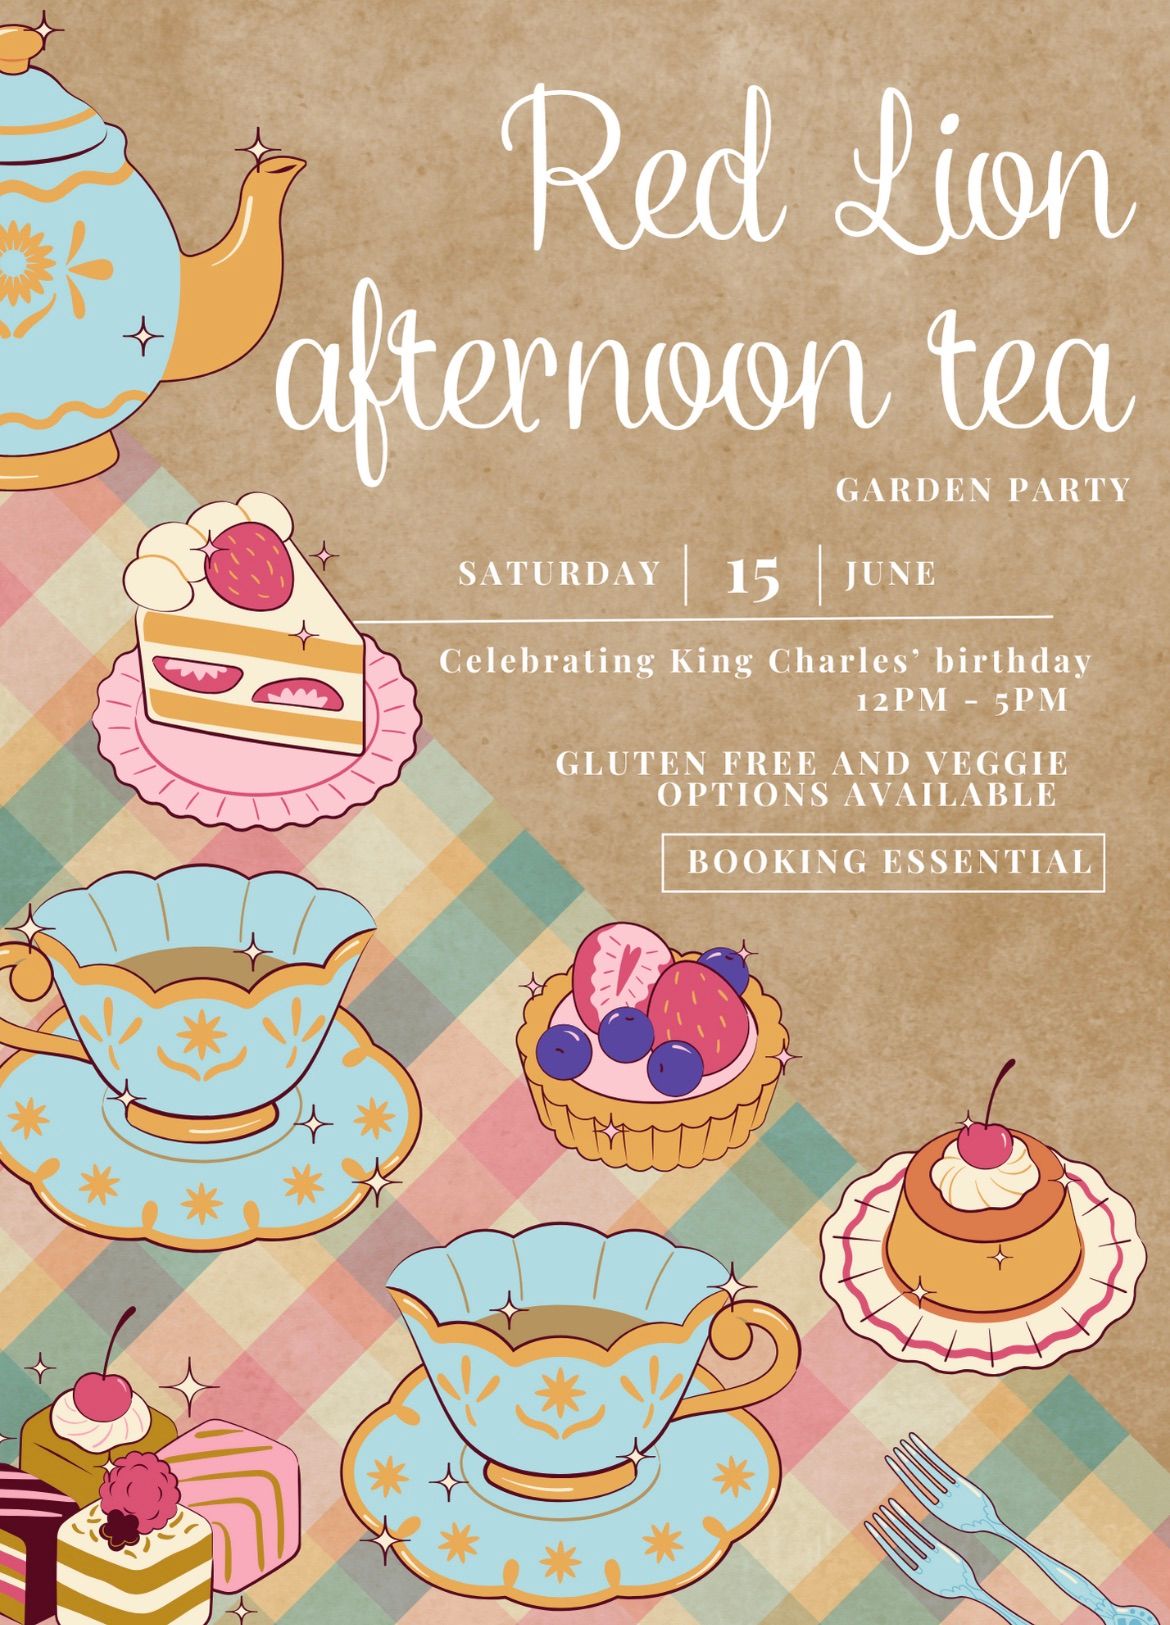 Afternoon tea party! 